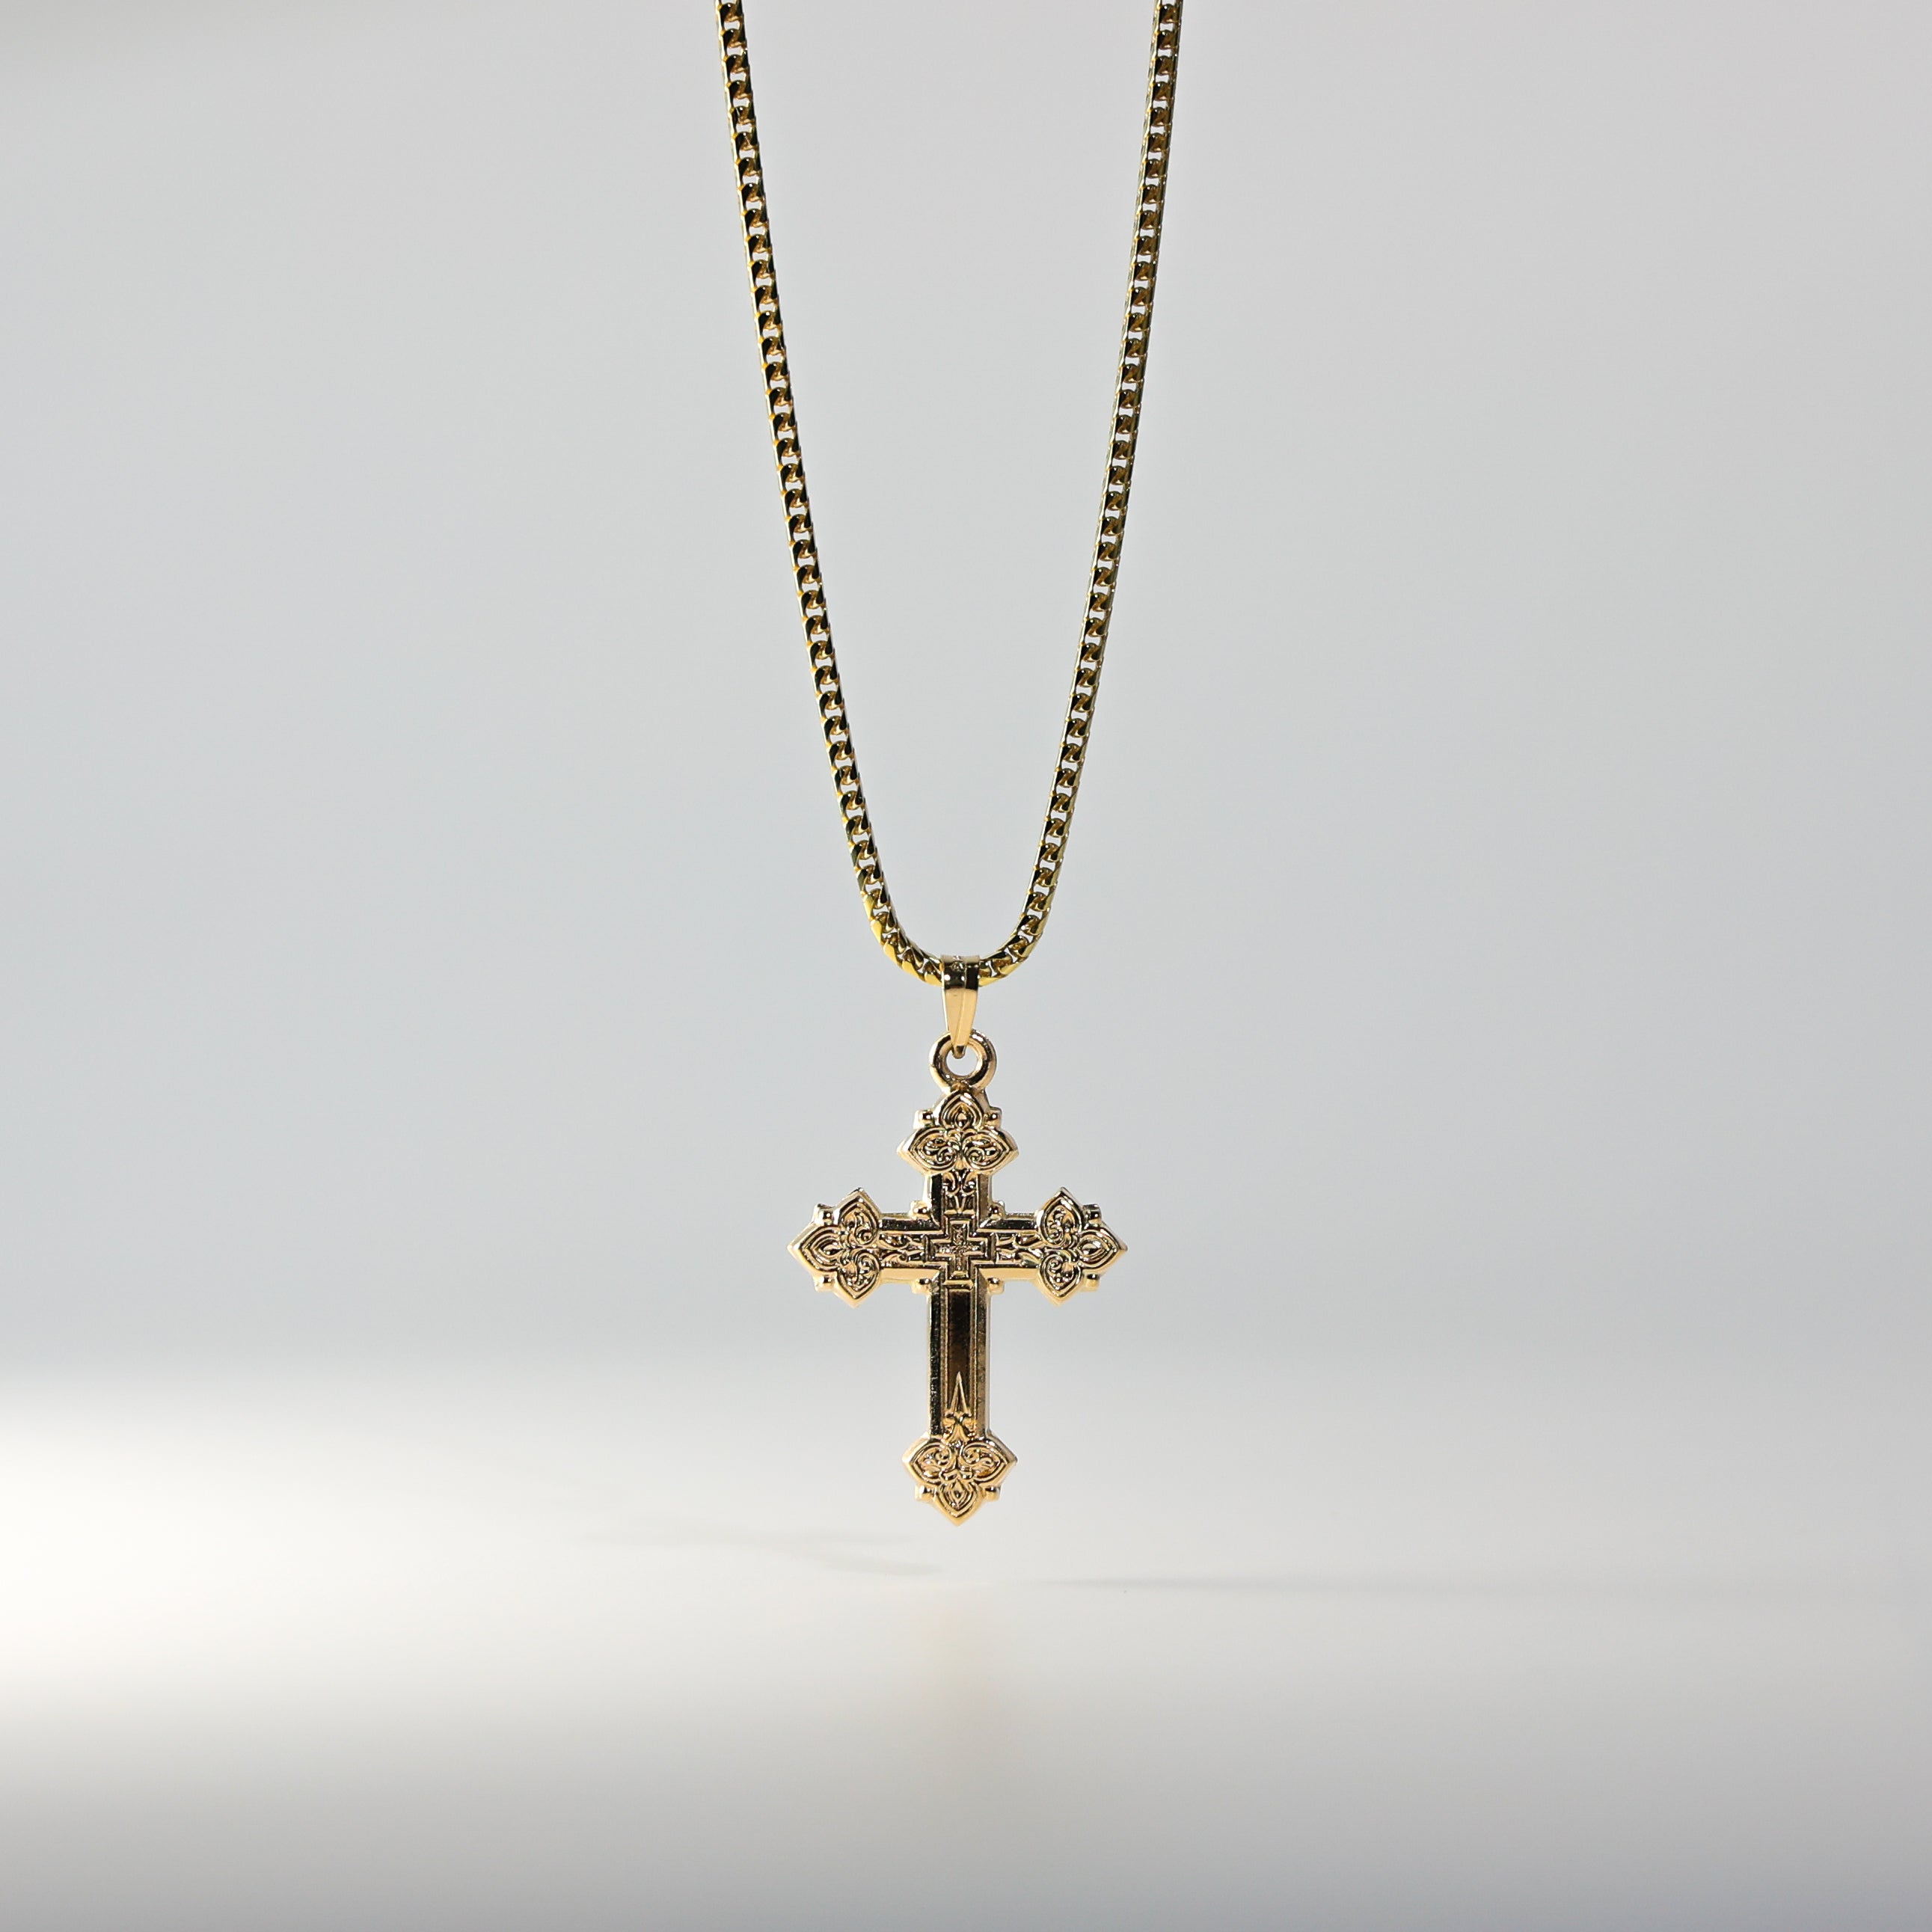 Gold Intricate Cross Religious Pendant Model-883 - Charlie & Co. Jewelry